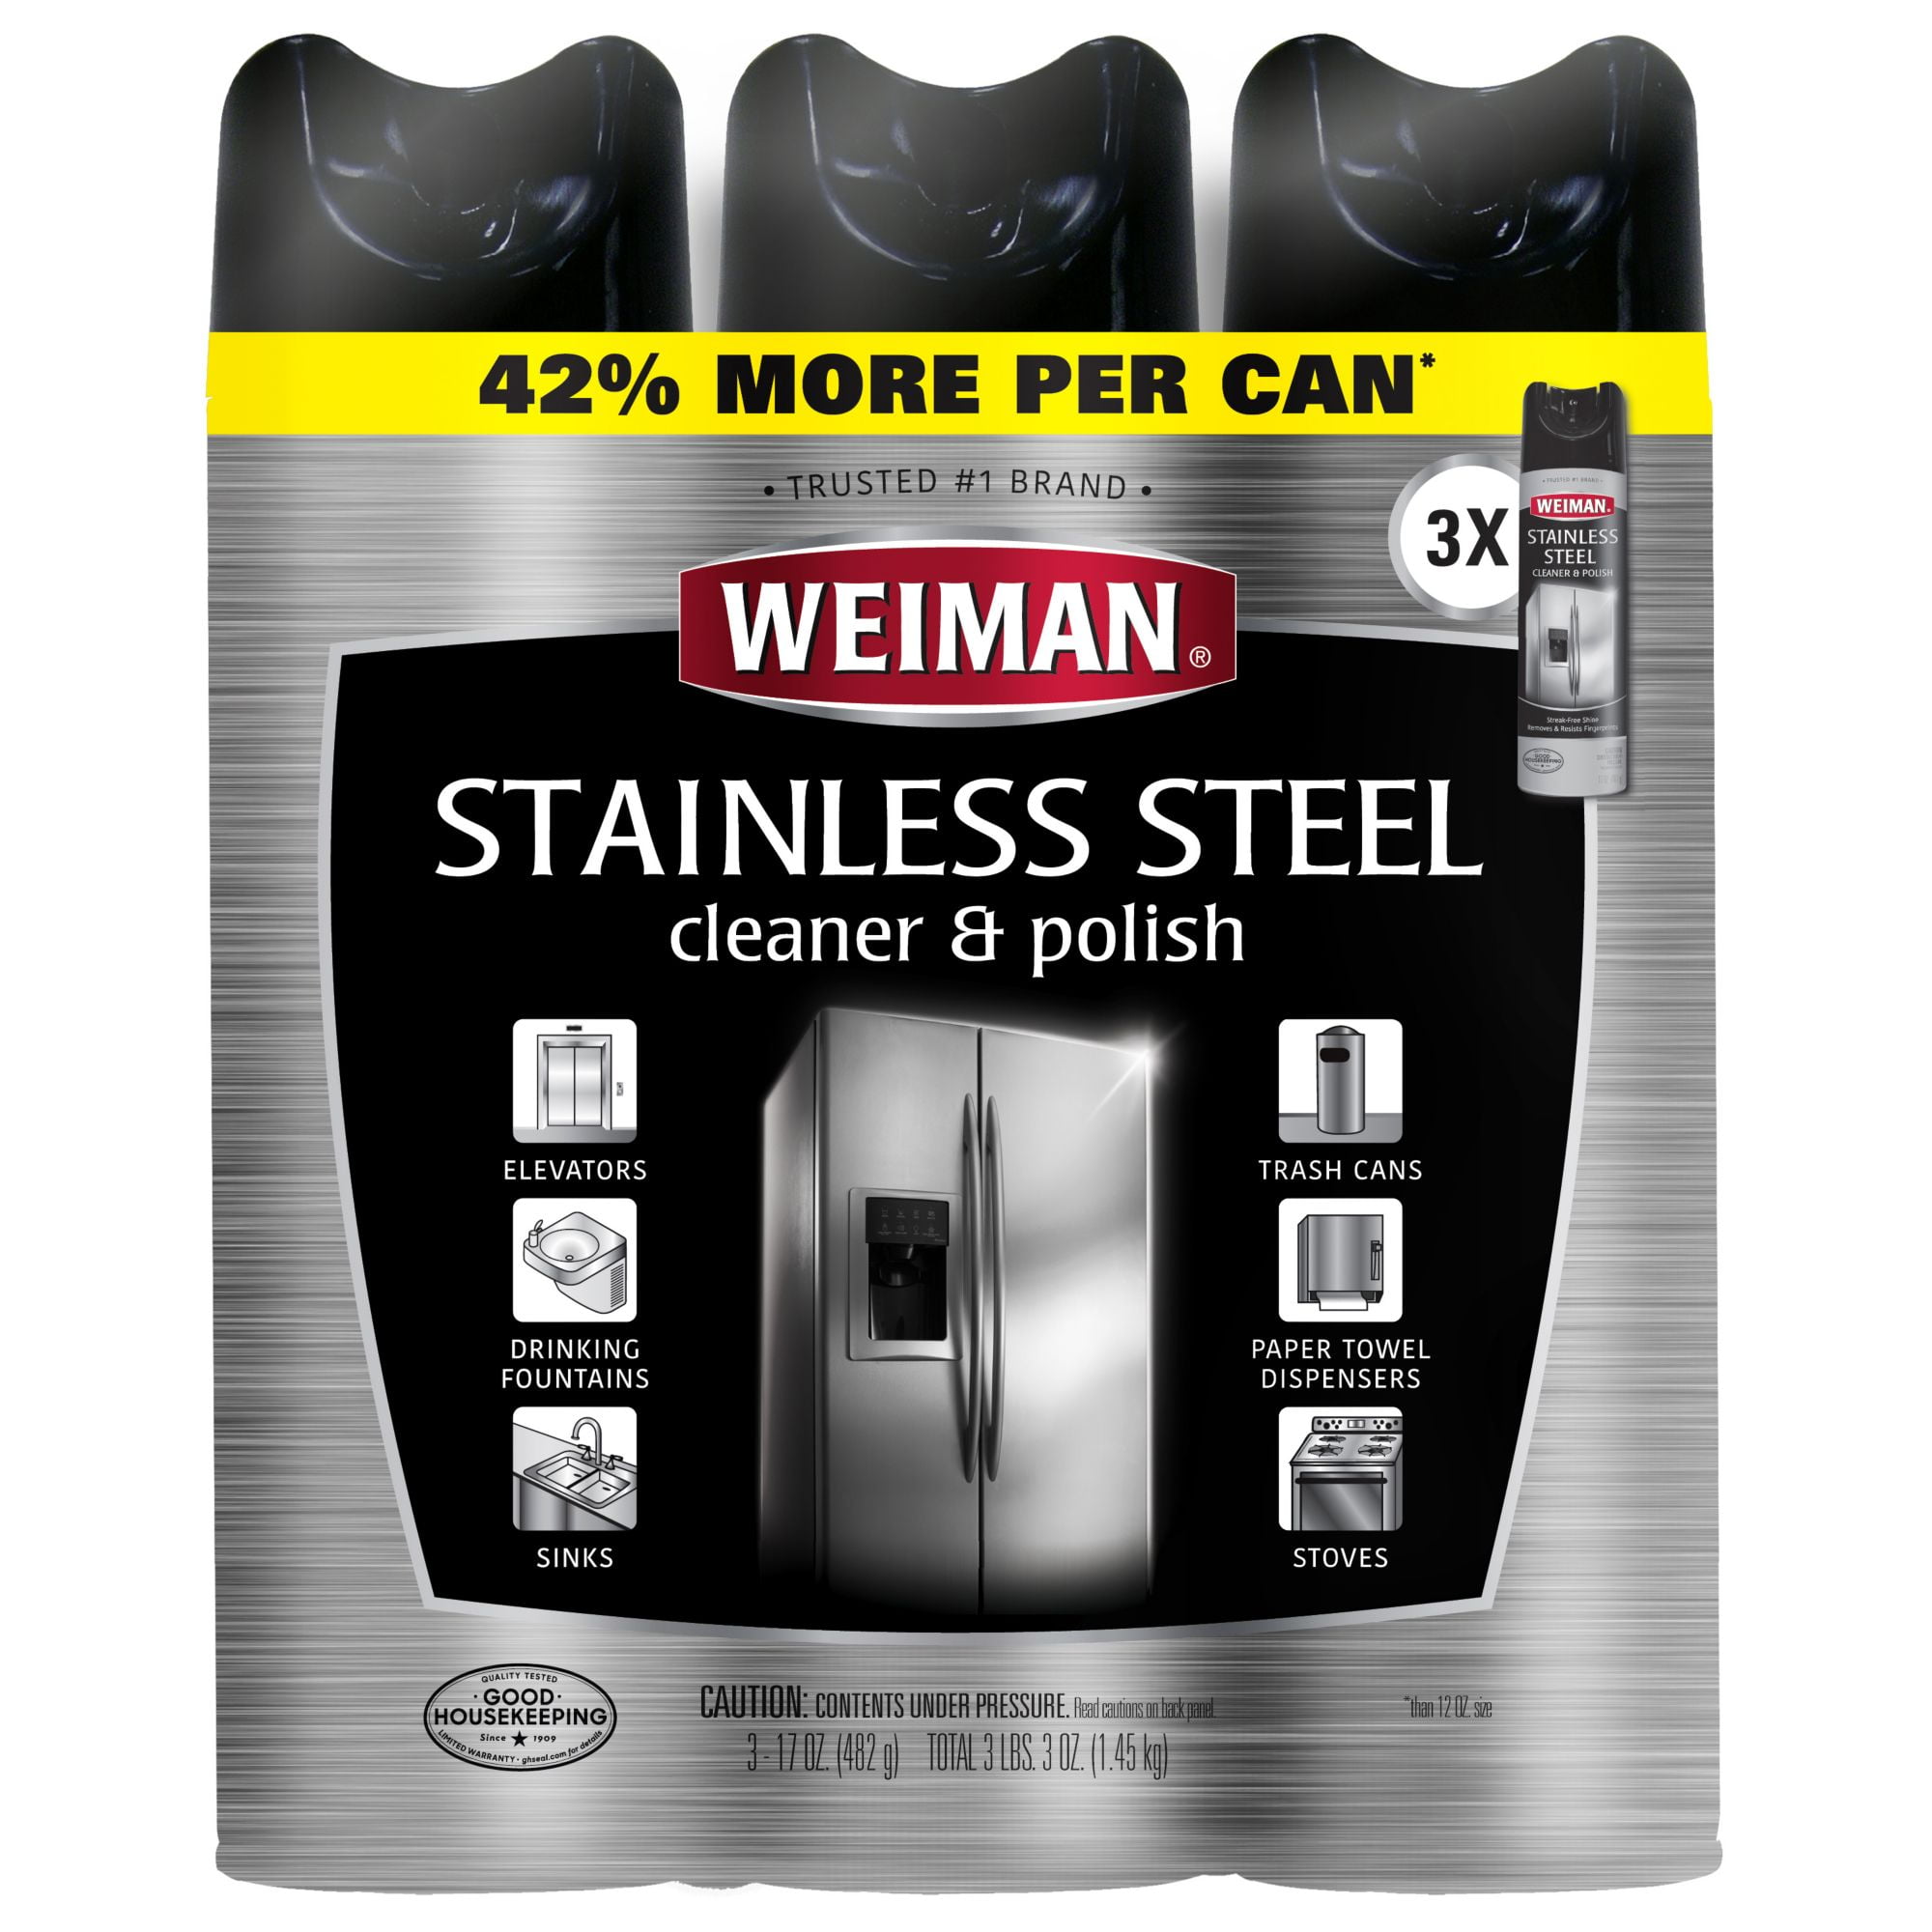 Product of Weiman Stainless Steel Cleaner, 3 pk./17 oz. - Walmart.com Weiman Stainless Steel Cleaner Walmart